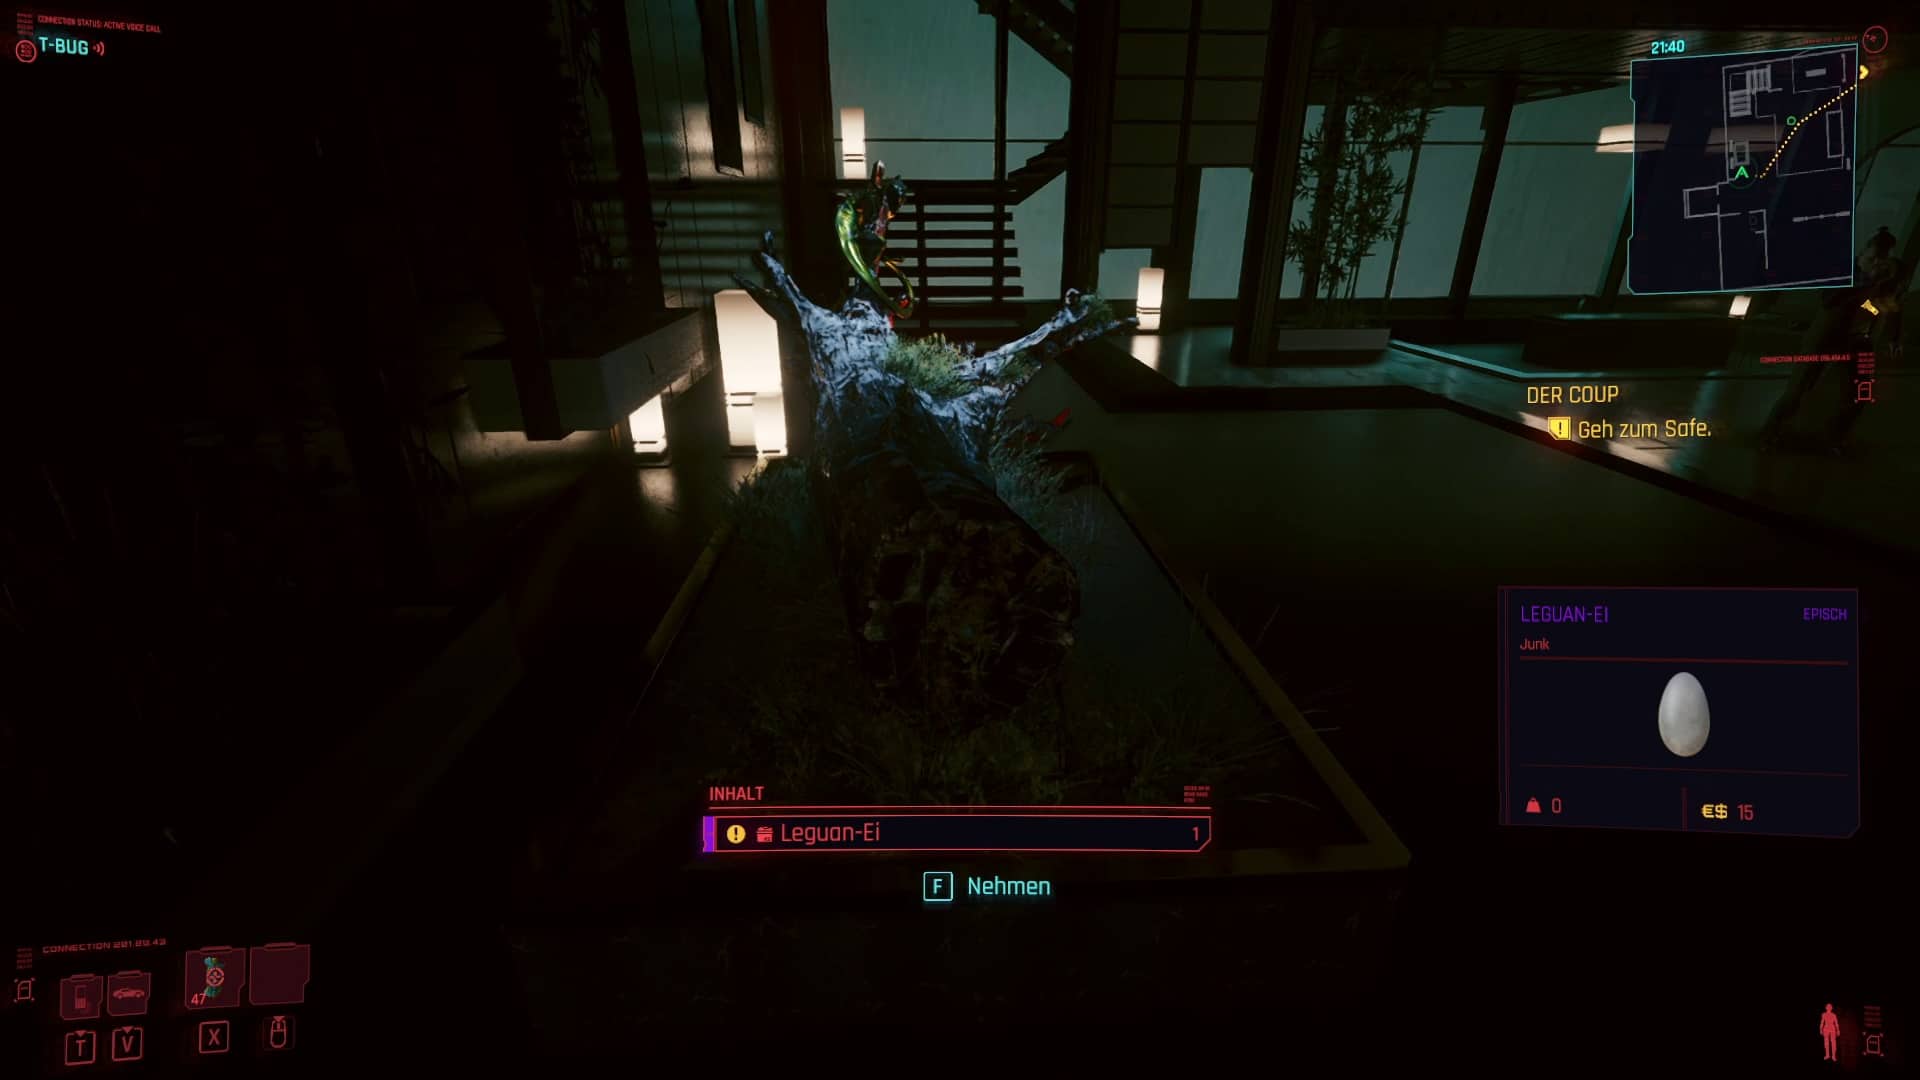 The best way to find the Iguana Egg is by the tree trunk in Yorinobu's flat when you are playing the main mission The Coup.